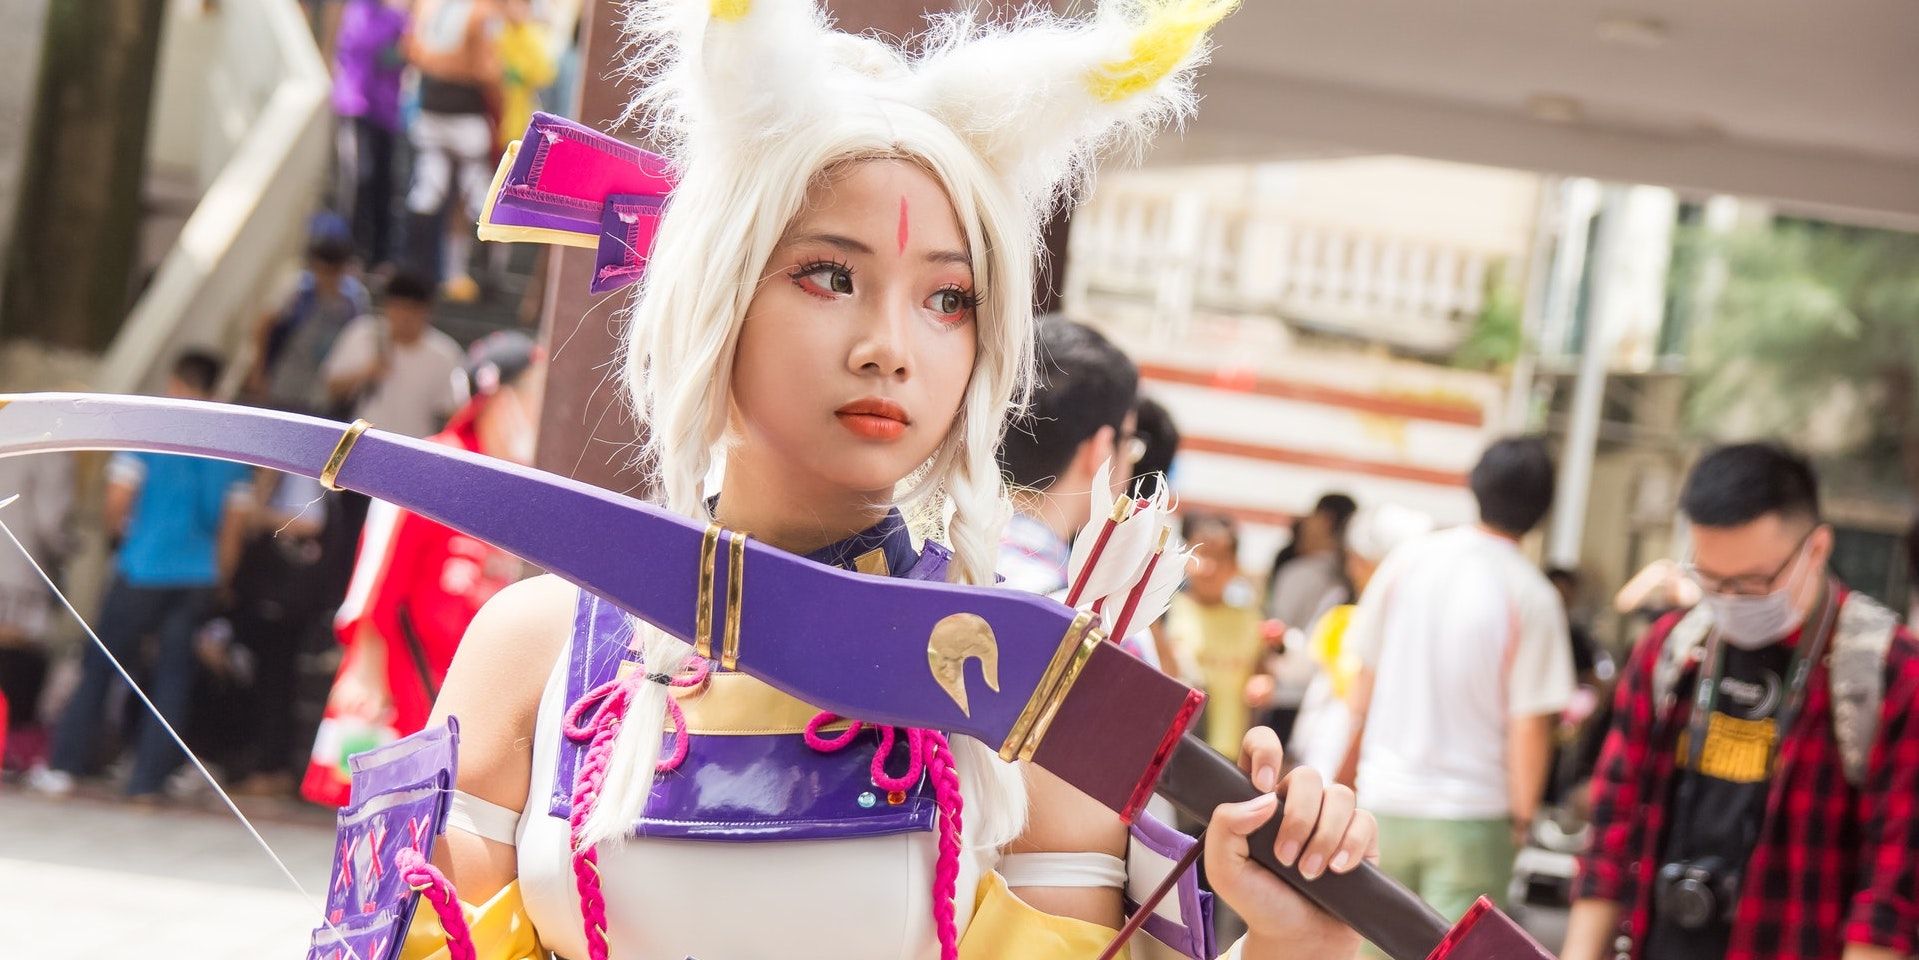 The 5 Best Cosplay Electronics Projects